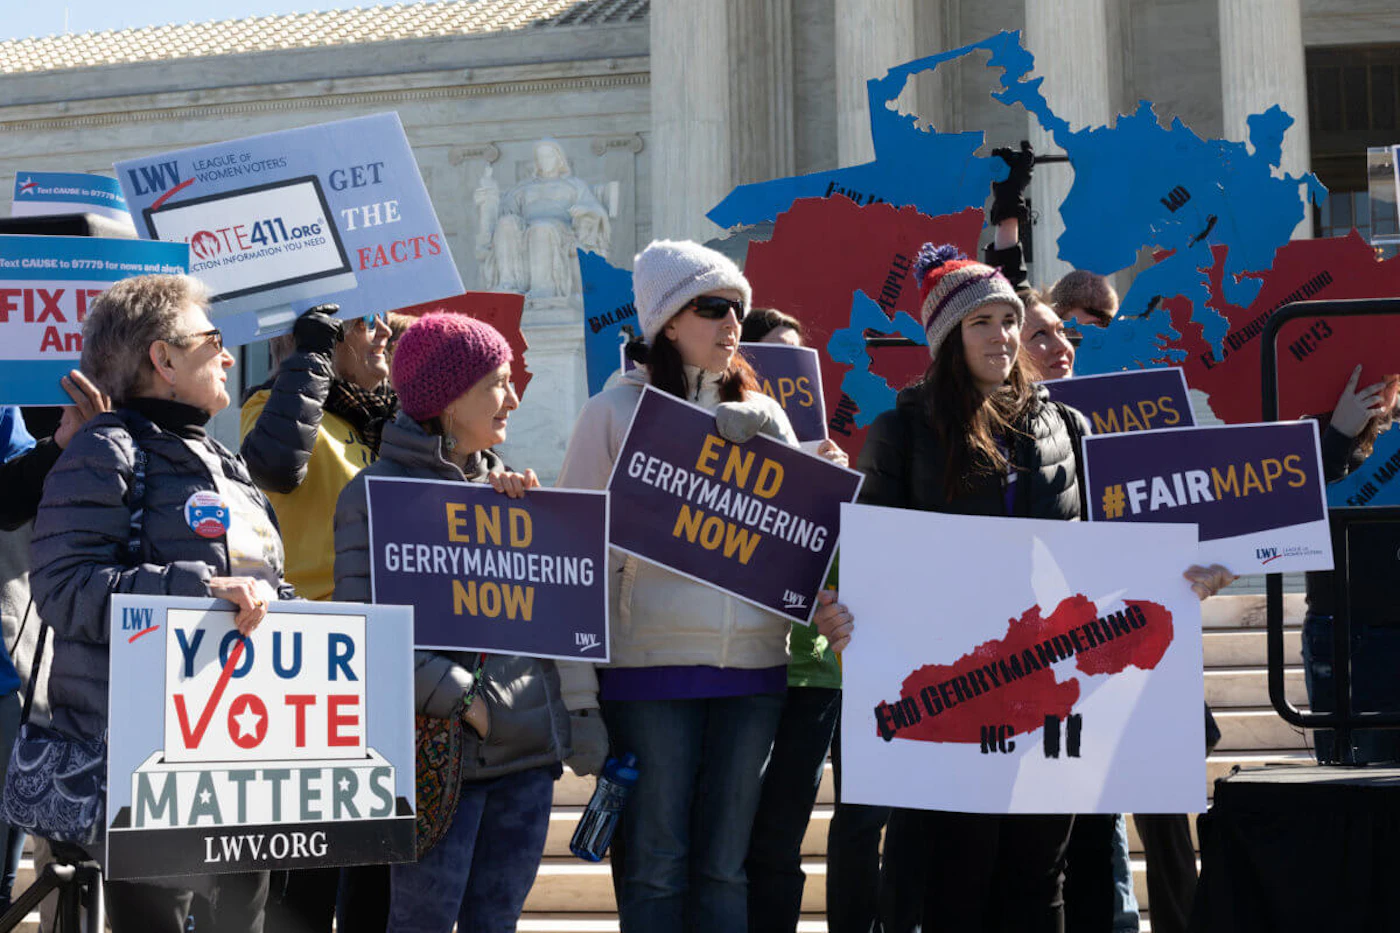 Organizations and individuals gathered outside the US Supreme Court in 2019 argue the manipulation of district lines is the manipulation of elections. Gerrymandering has been a major concern in North Carolina for decades running.
(Photo by Aurora Samperio/NurPhoto via Getty Images)